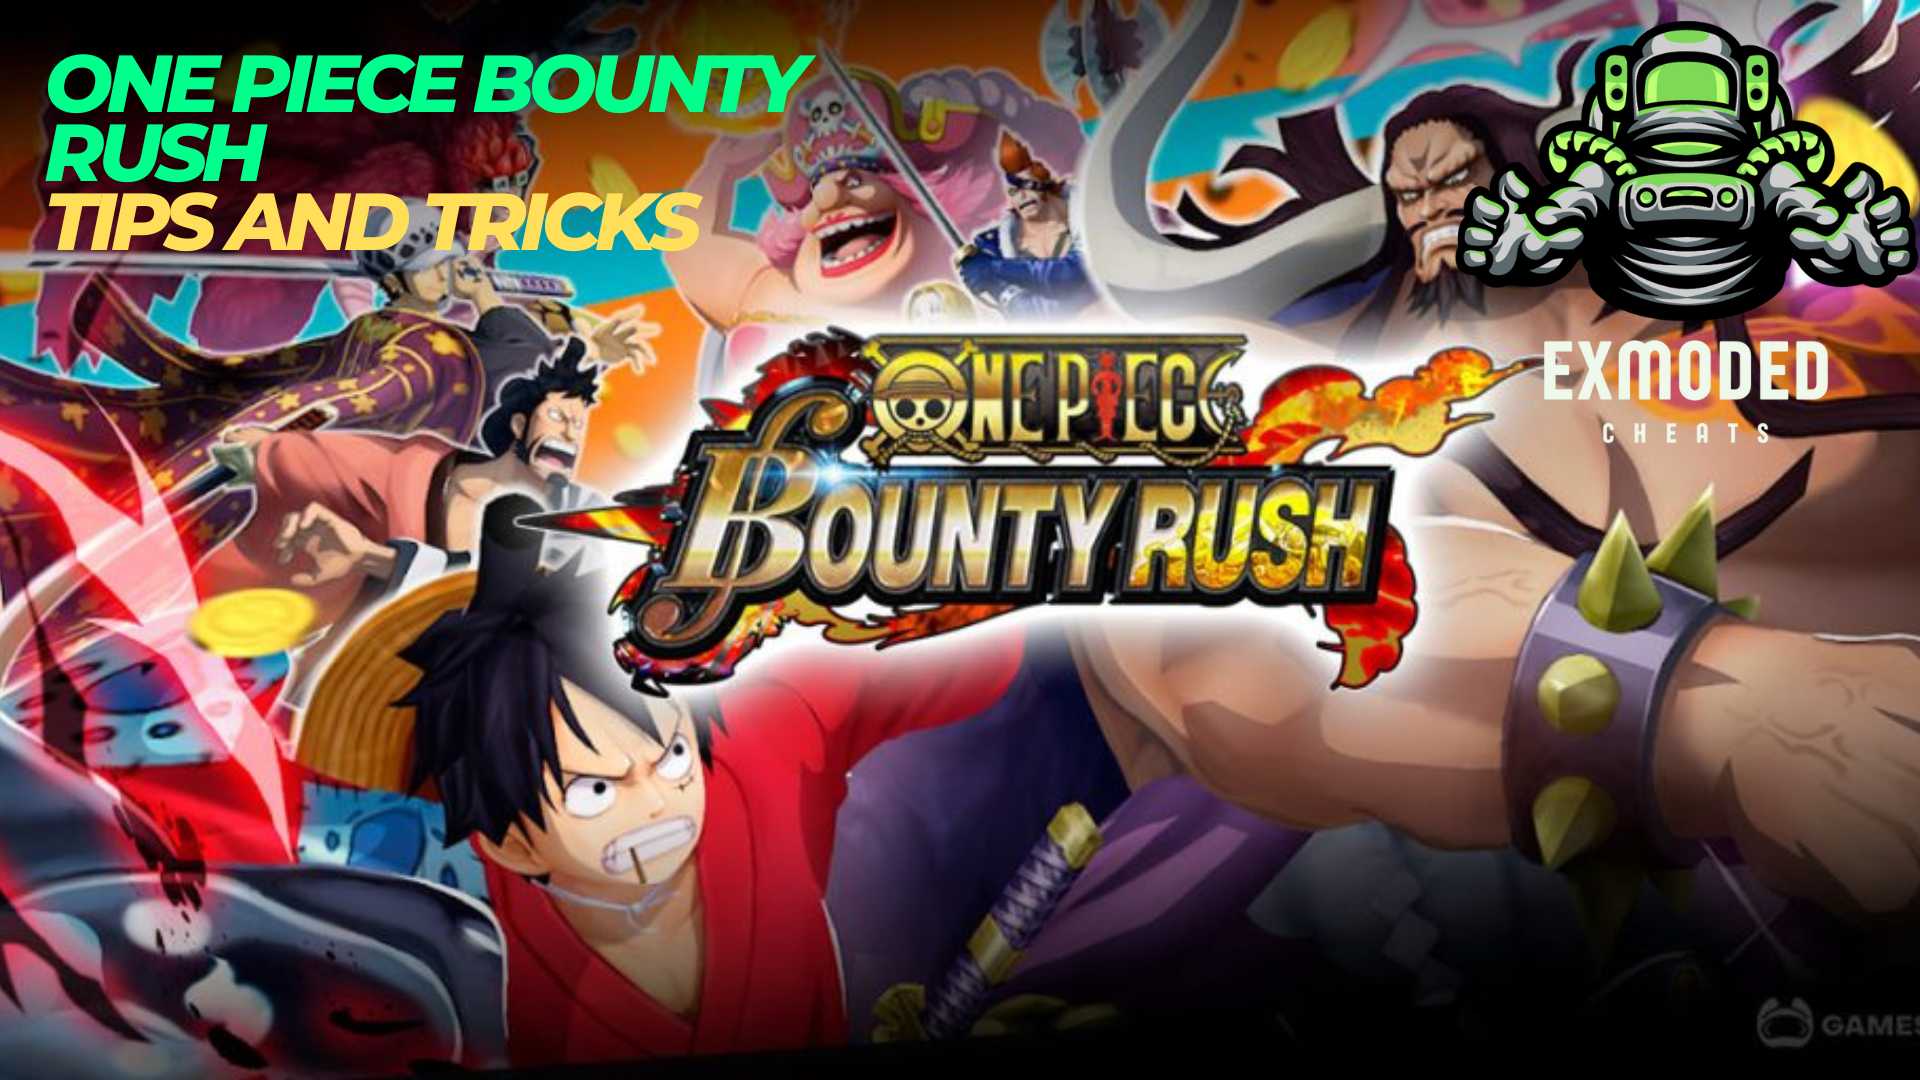 ONE PIECE Bounty Rush tips and tricks